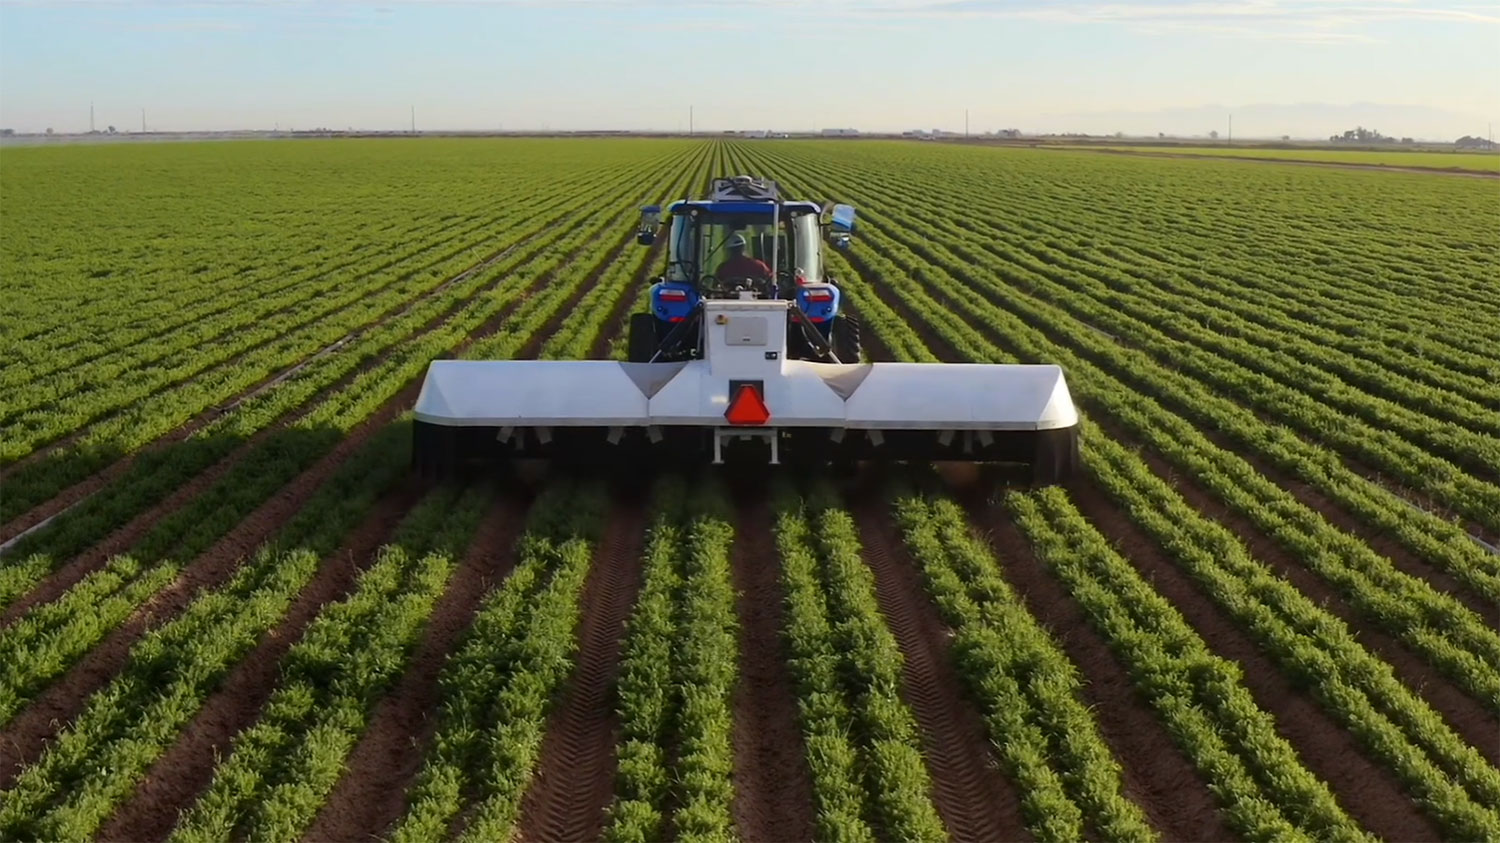 How to Ship an Agricultural Robot